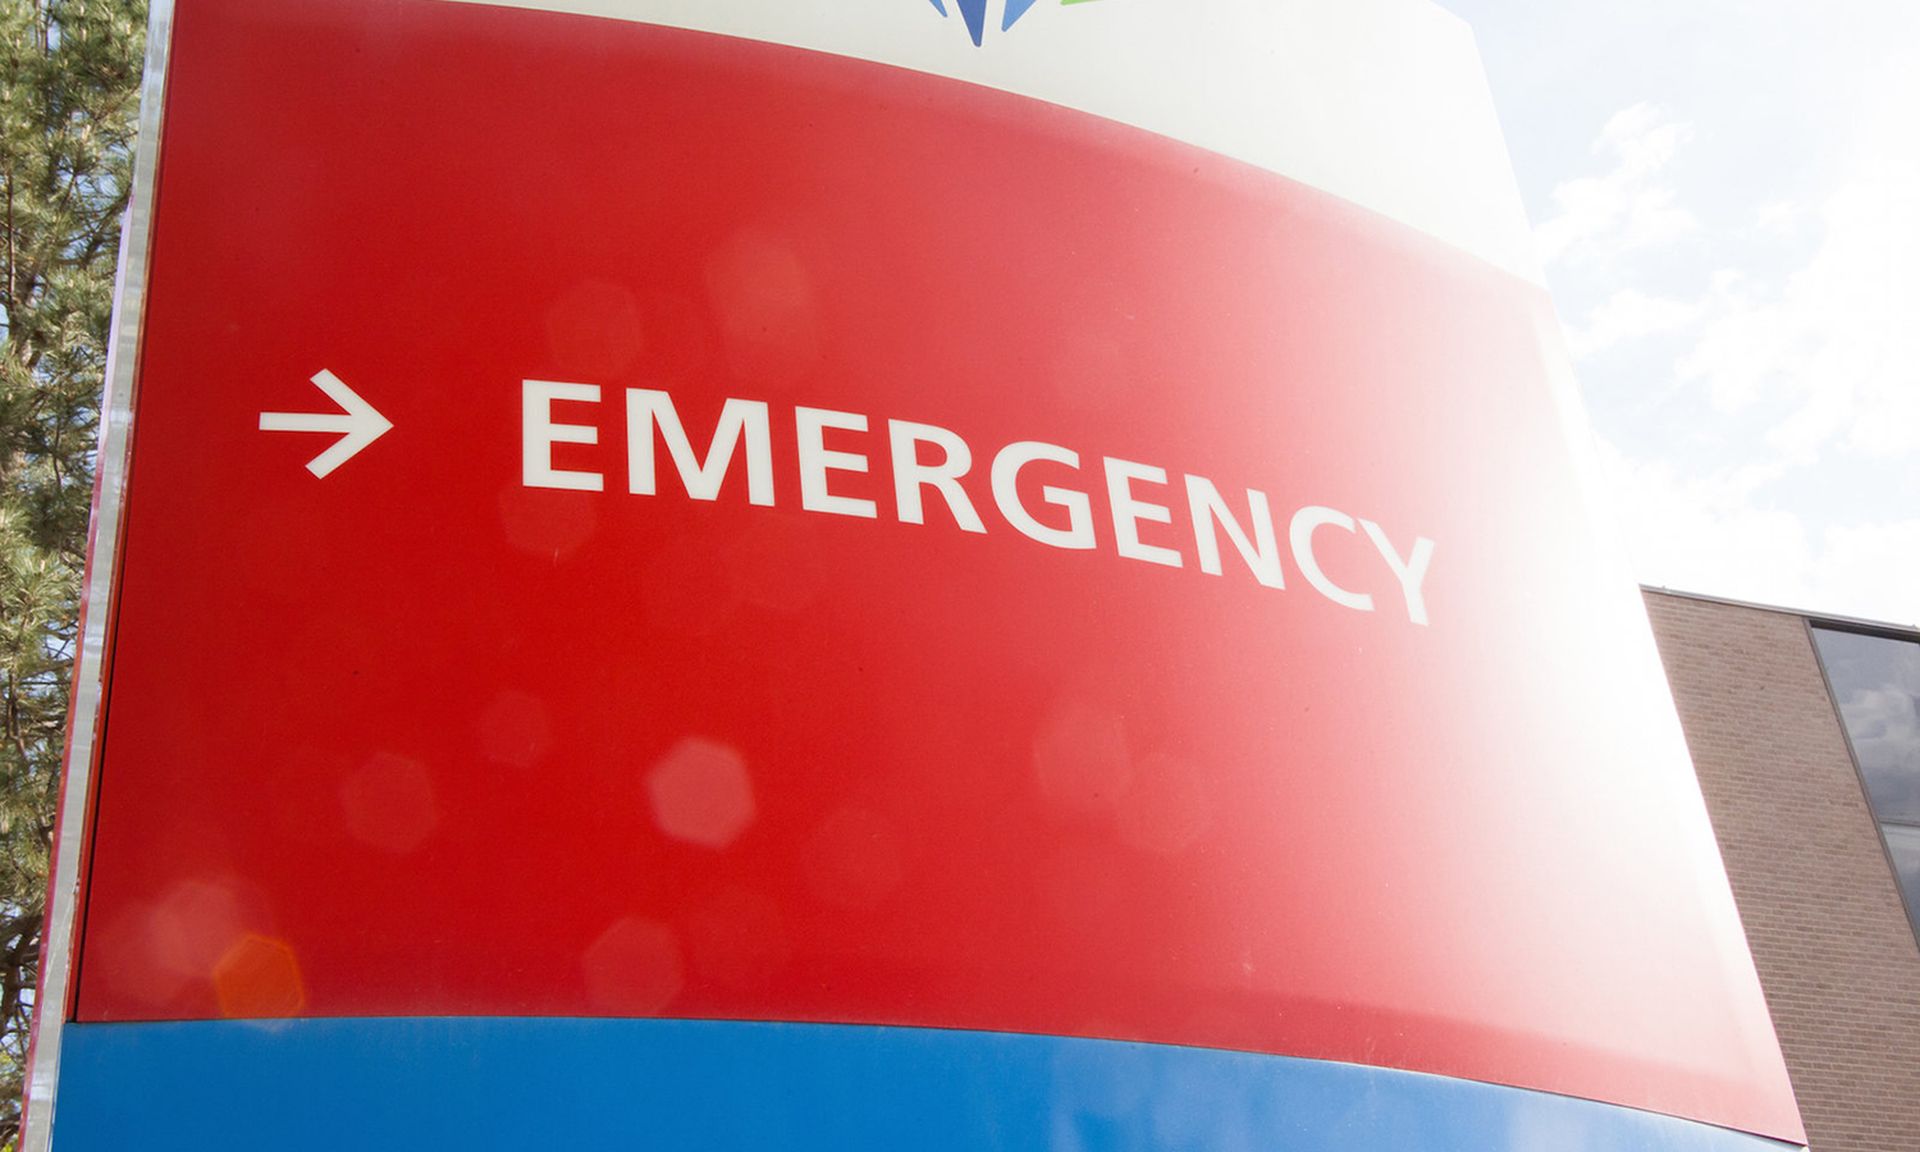 A red sign directing visitors to a hospital emergency room is seen.